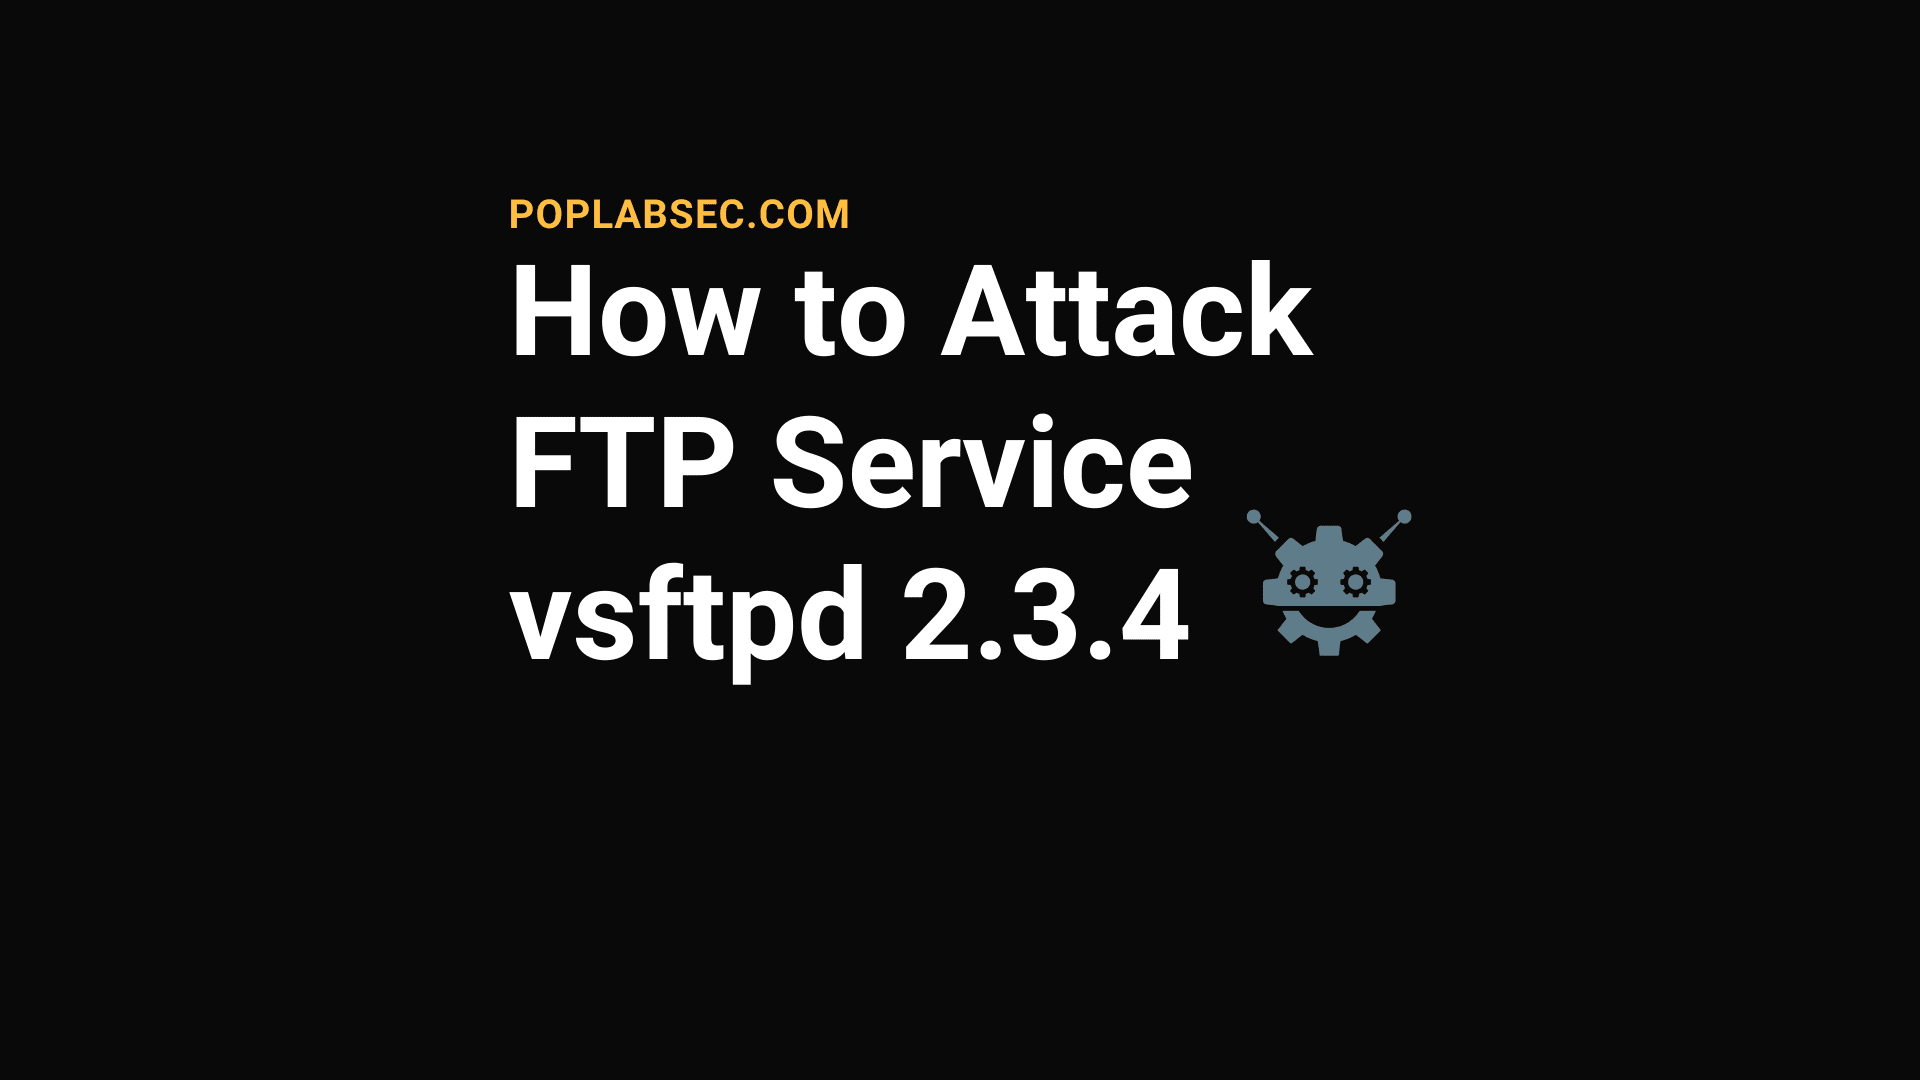 Learn How to Attack FTP Service vsftpd 2.3.4